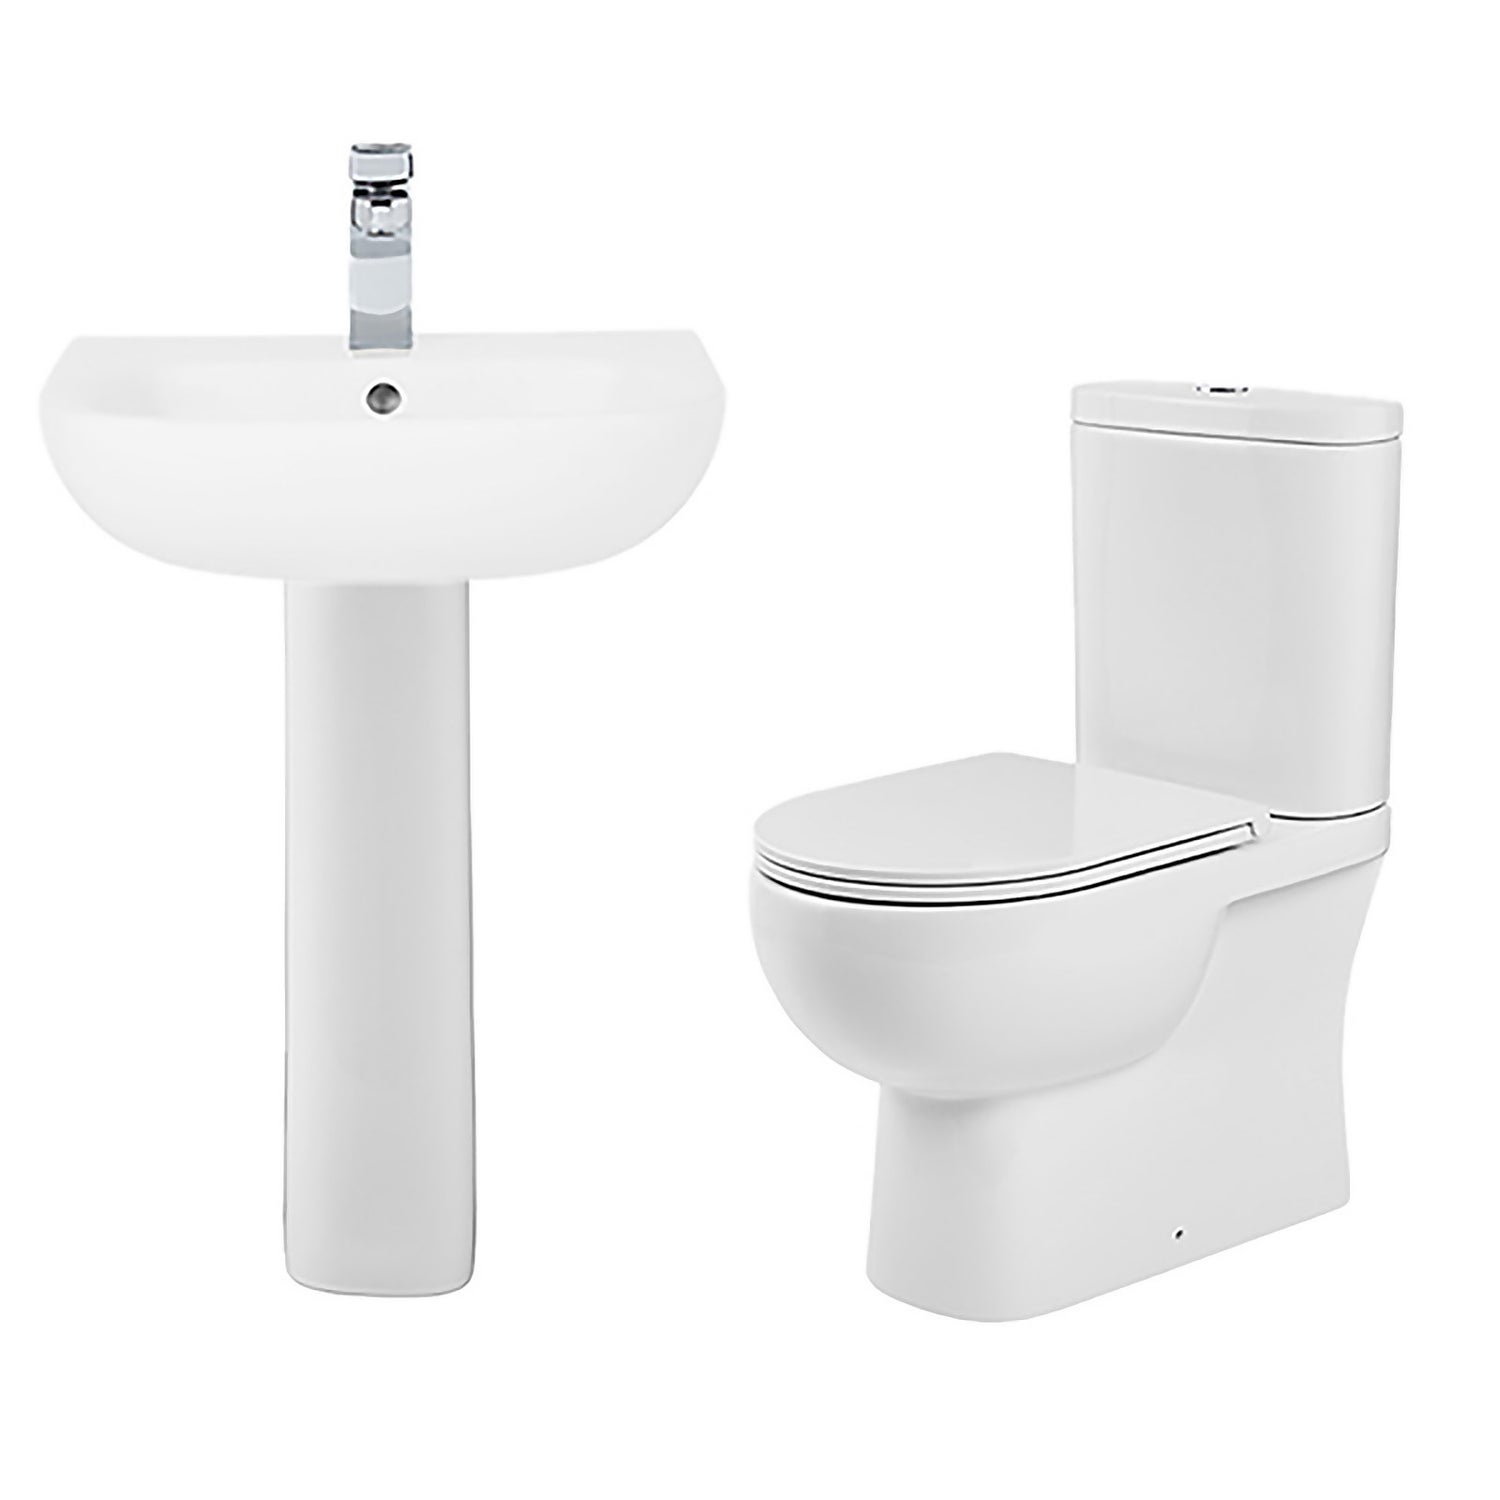 Newton White Close Coupled Toilet with Soft Close Toilet Seat and Full Basin Pedestal Duo